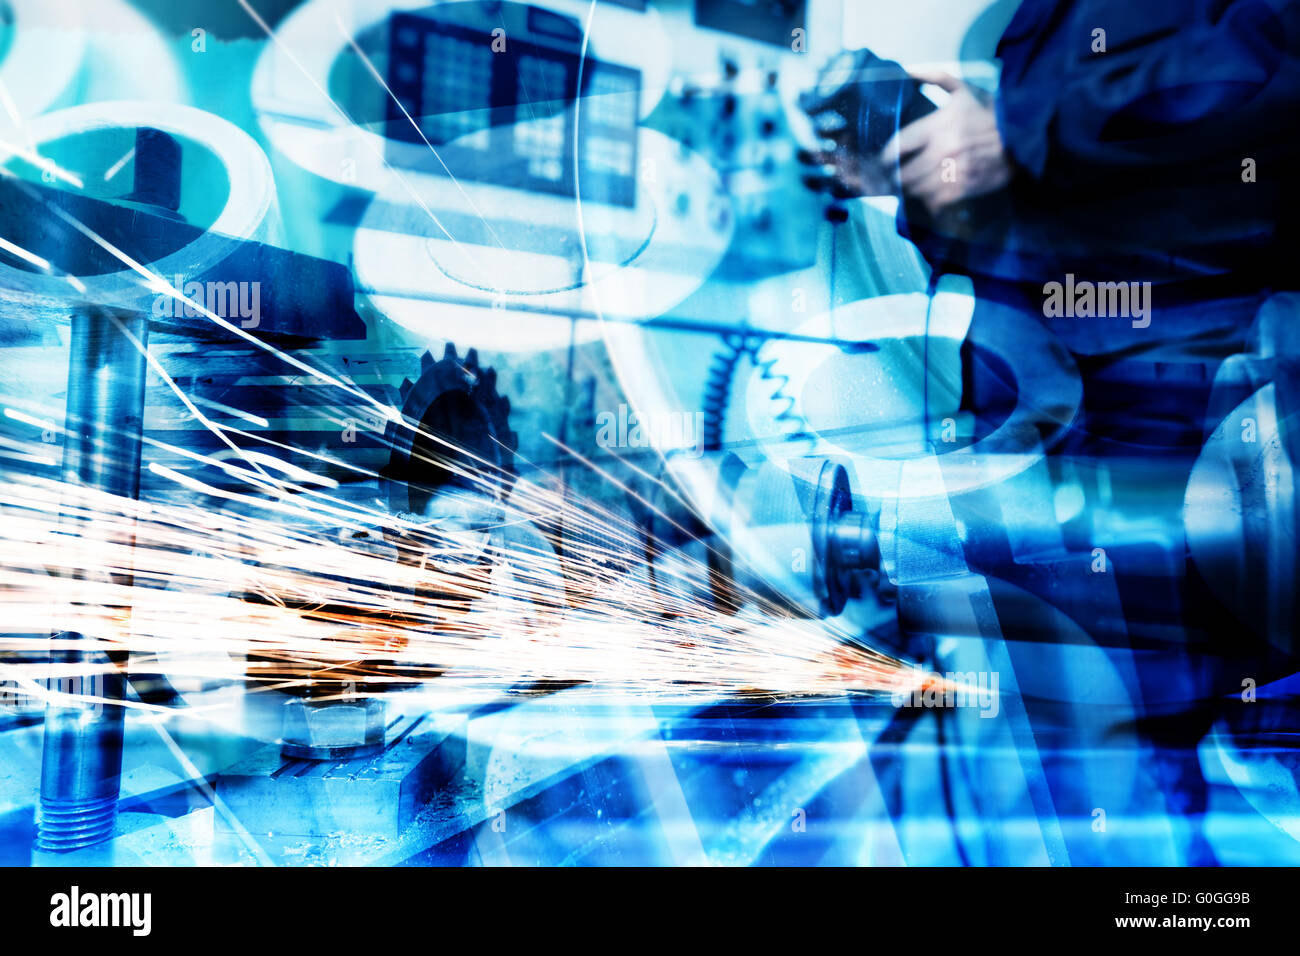 Industrial technology abstract background. Industry Stock Photo